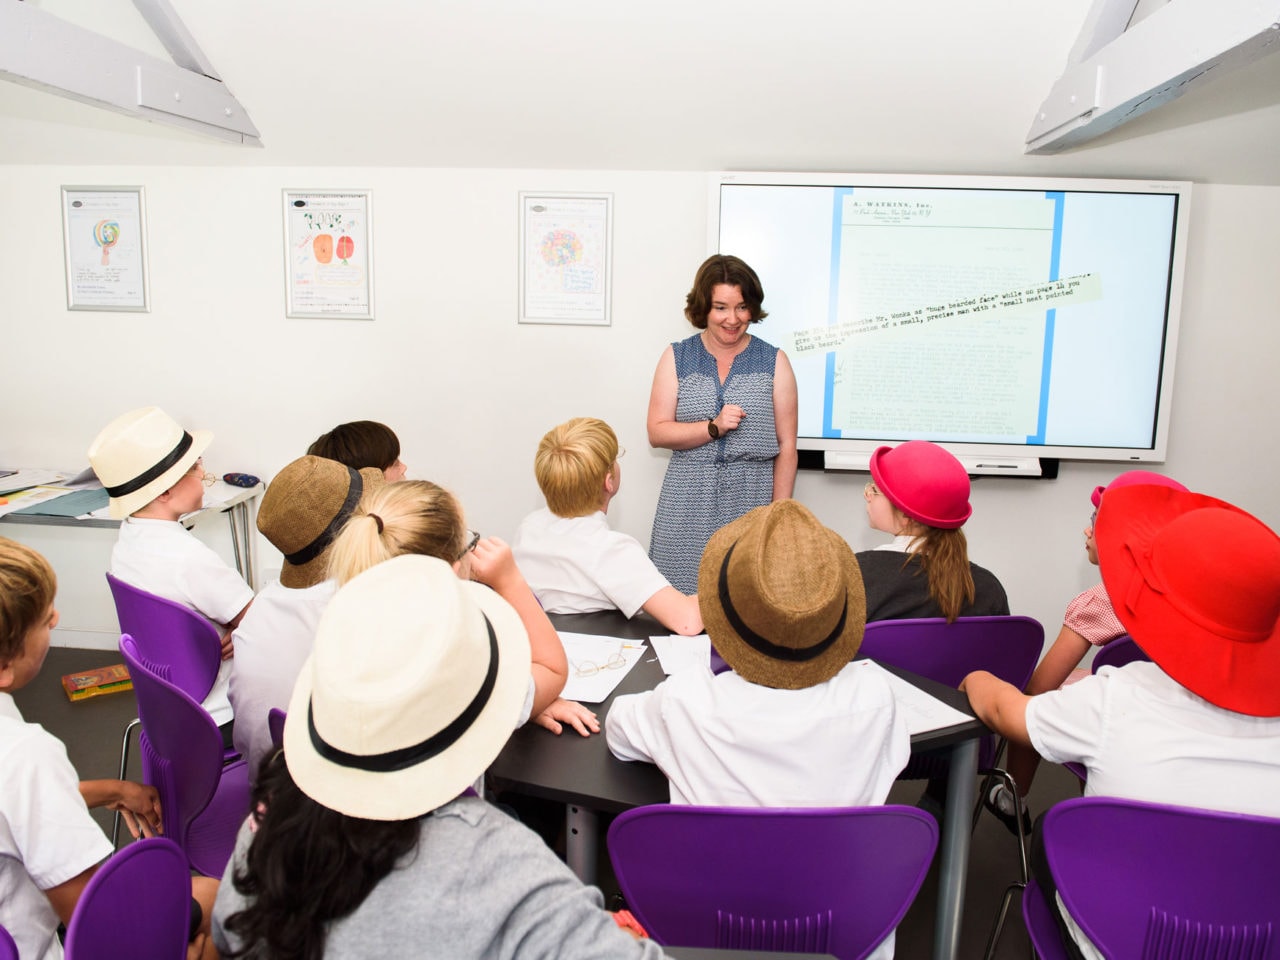 A school session leader faces the camera. In front of her are a group of primary school children sat in chairs. They have their backs to the cameras and they all have different, colourful hats on. They are engrossed in what the adult is saying.